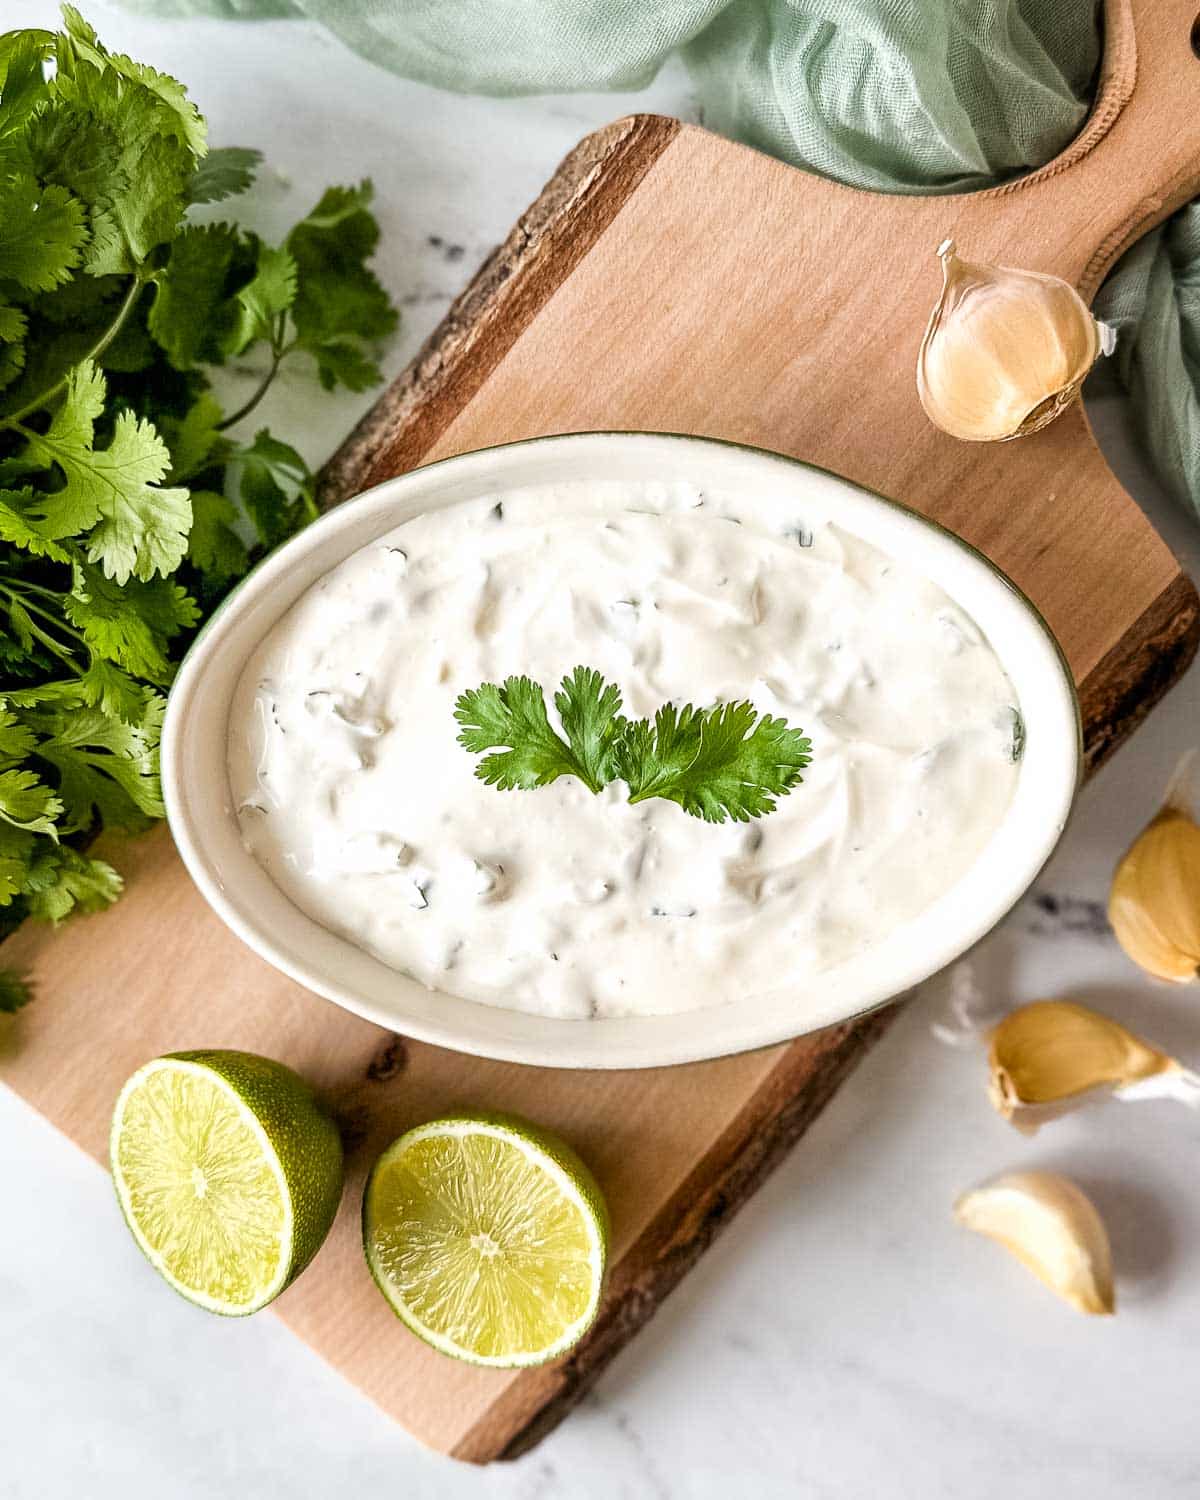 Cilantro lime crema in a white and green dish surrounded by lime halves, fresh cilantro, and garlic cloves.